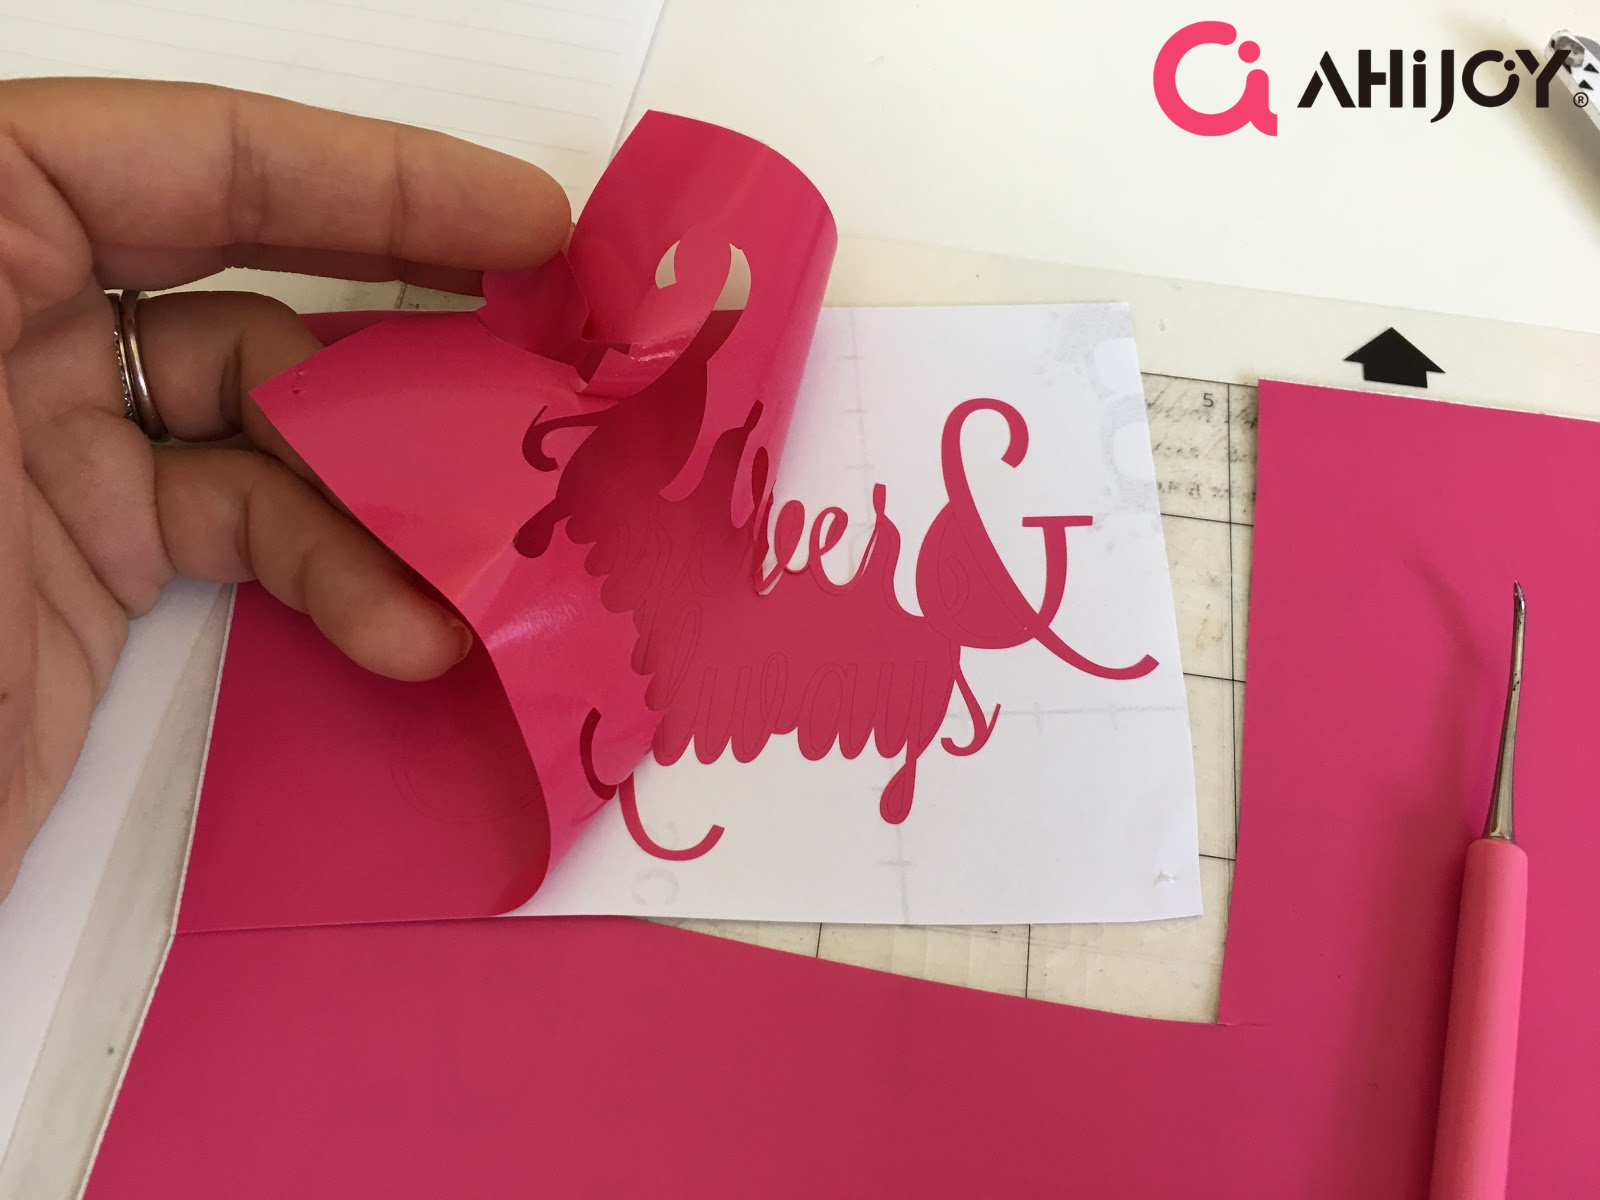 How To Cut Heat Transfer Vinyl Using Silhouette Cameo 4?